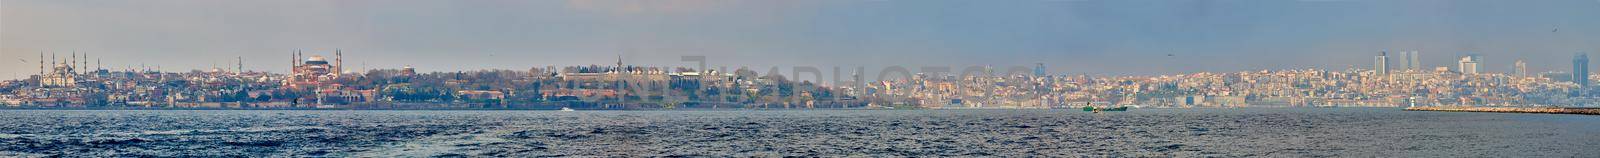 Panorama of Istanbul with Hagia Sophia, Blue Mosque and Topkapi Palace, Turkey.